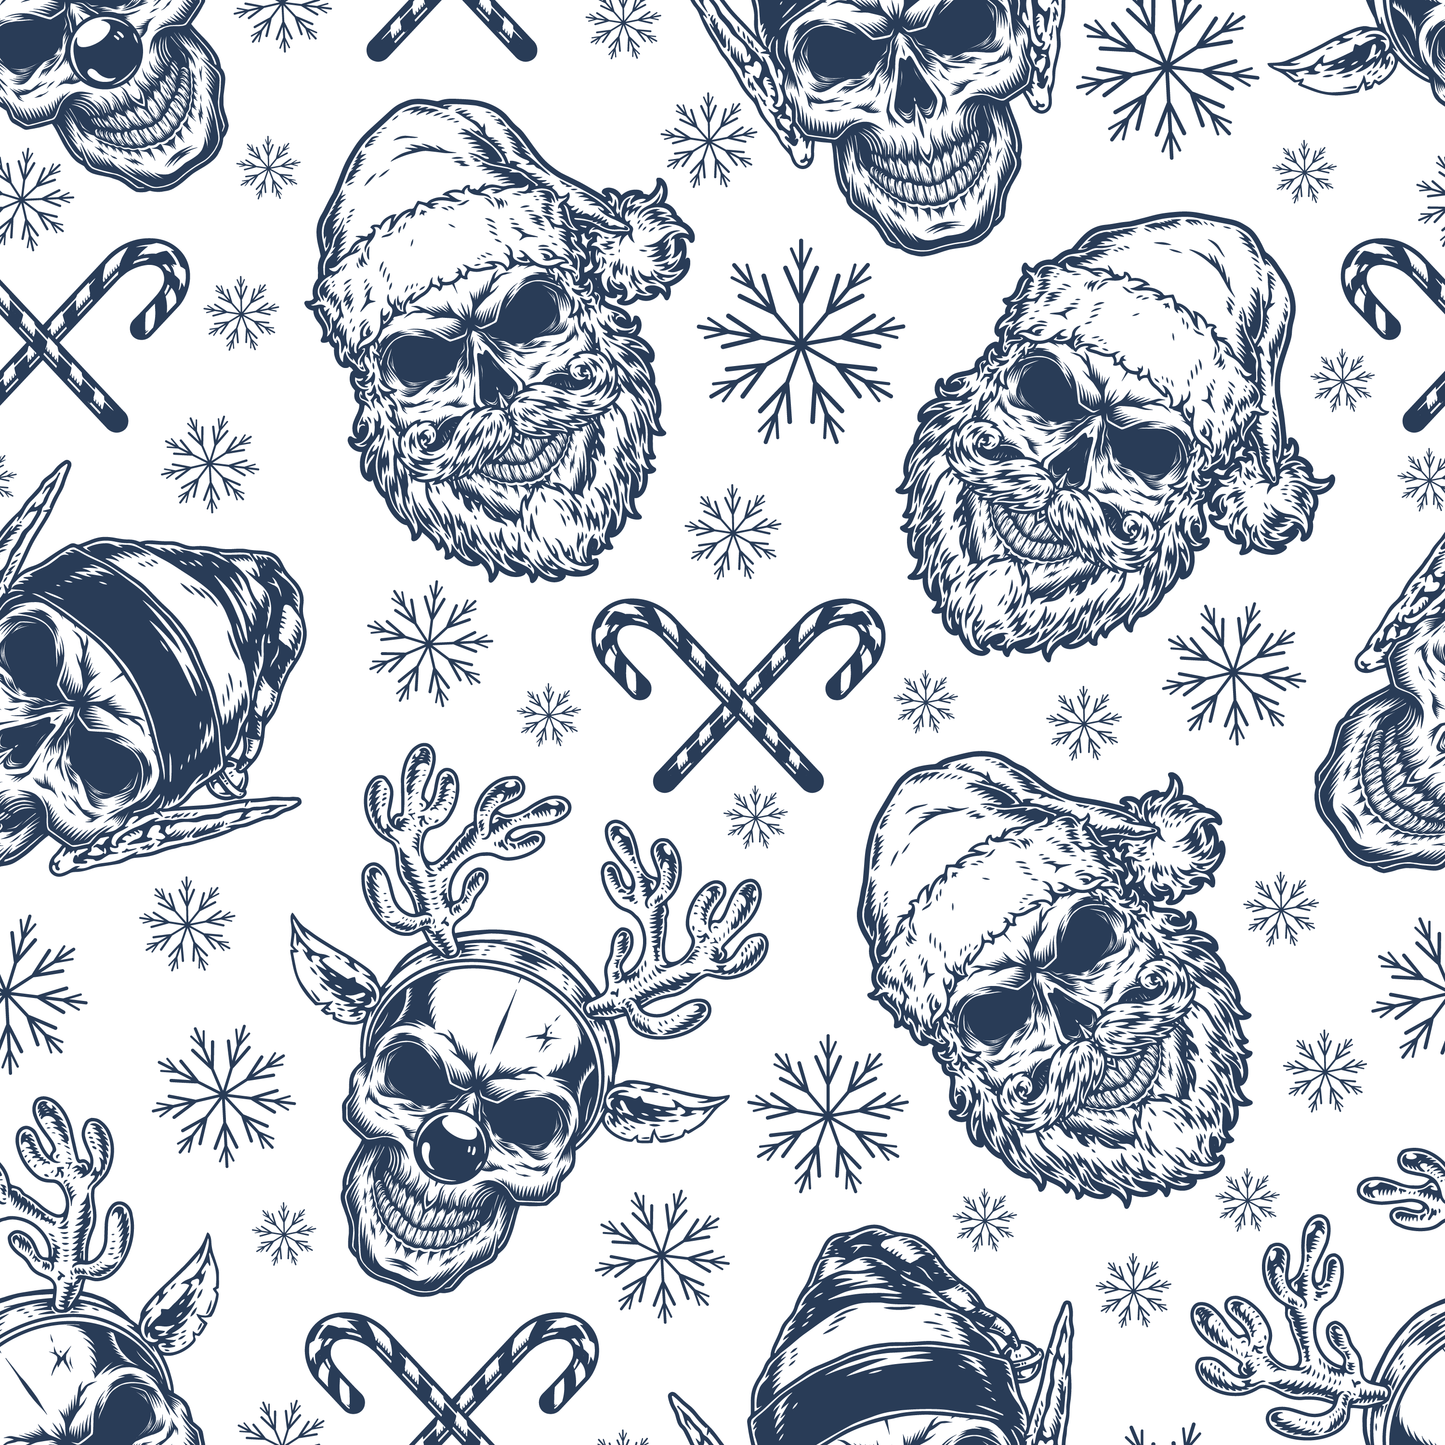 Christmas Skulls & Candy Canes (Faux Leather - 8" x 13" Printed Sheet)